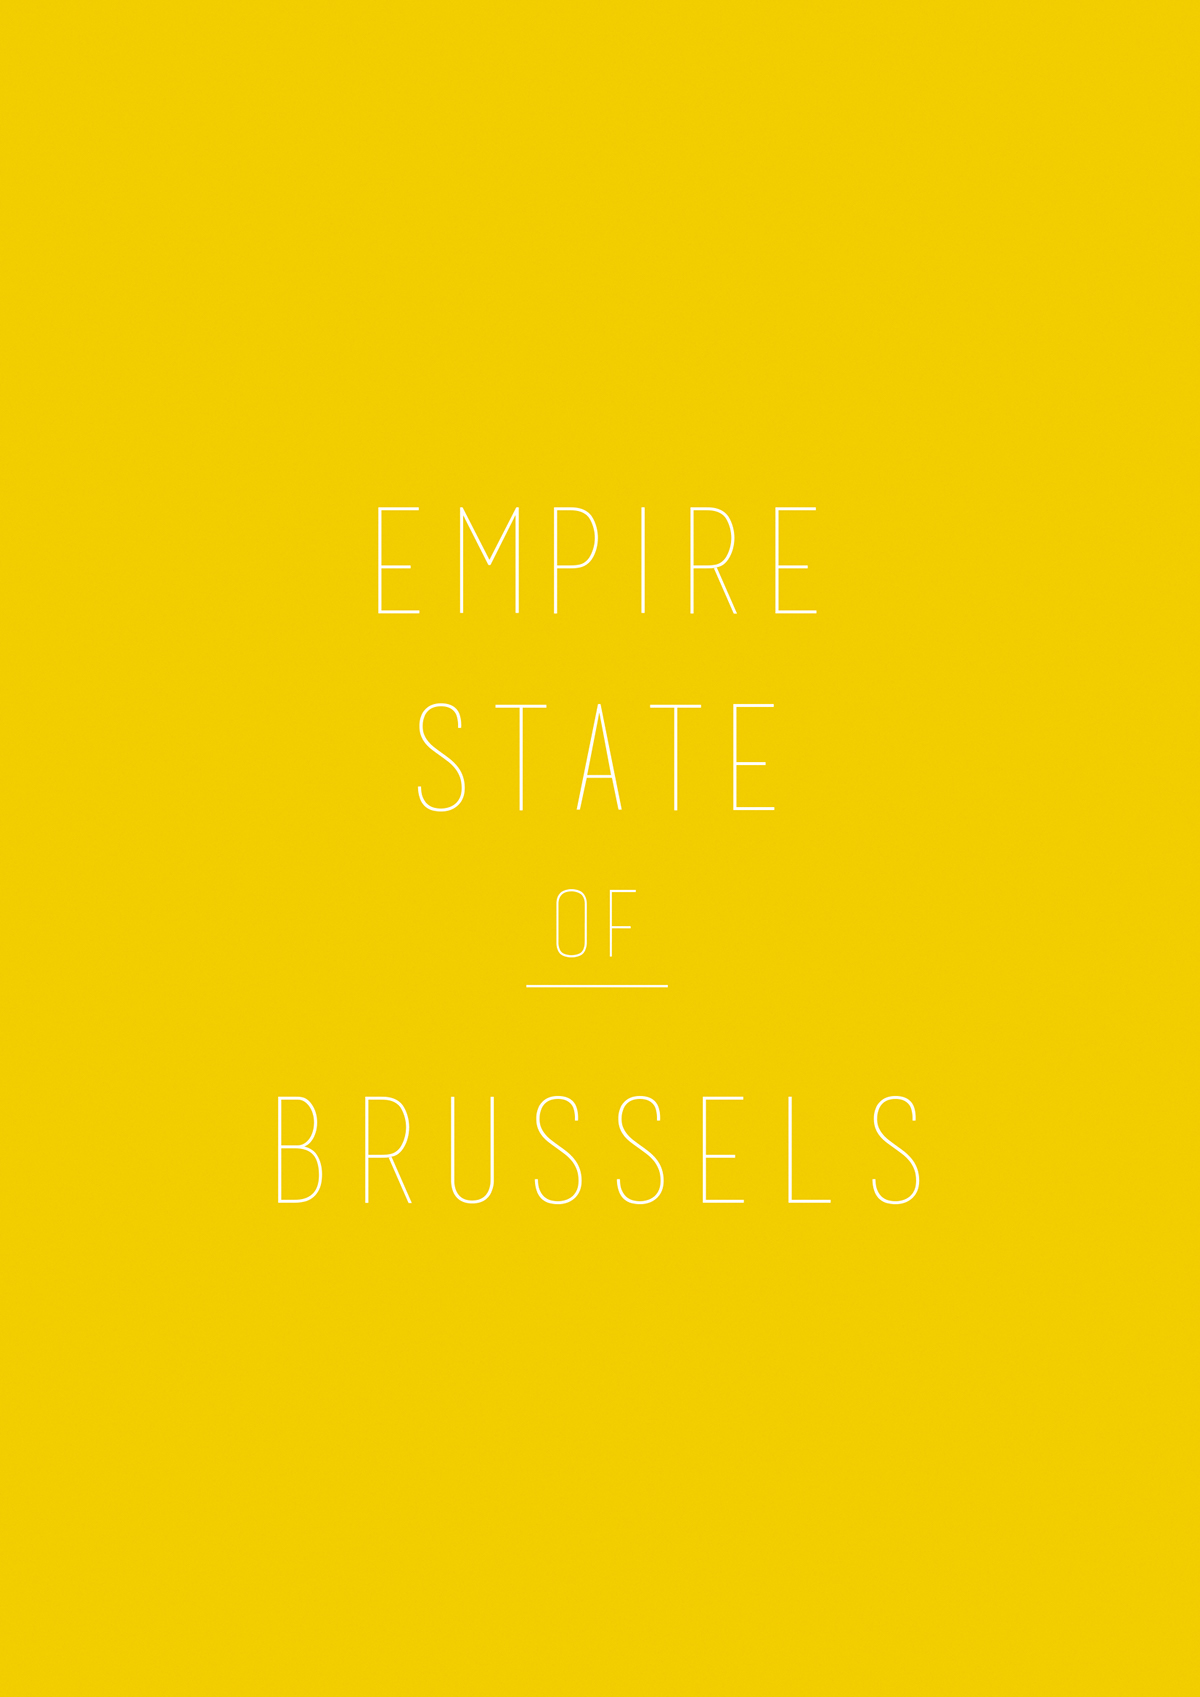 brussels rough